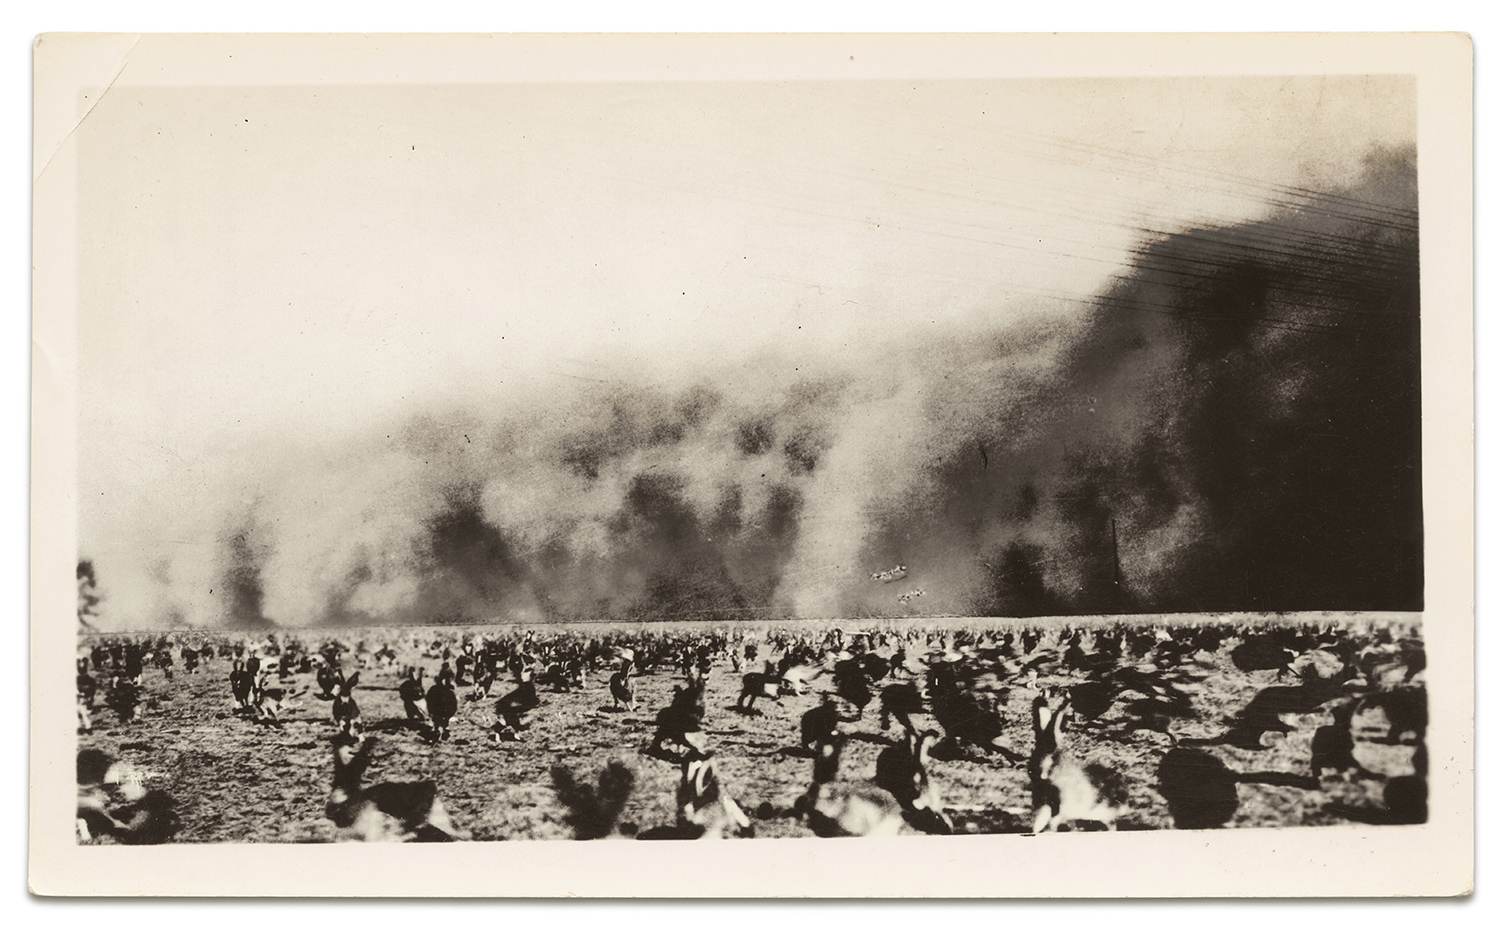 A dust storm surges behind hundreds of running jackrabbits during a 1930s rabbit drive.